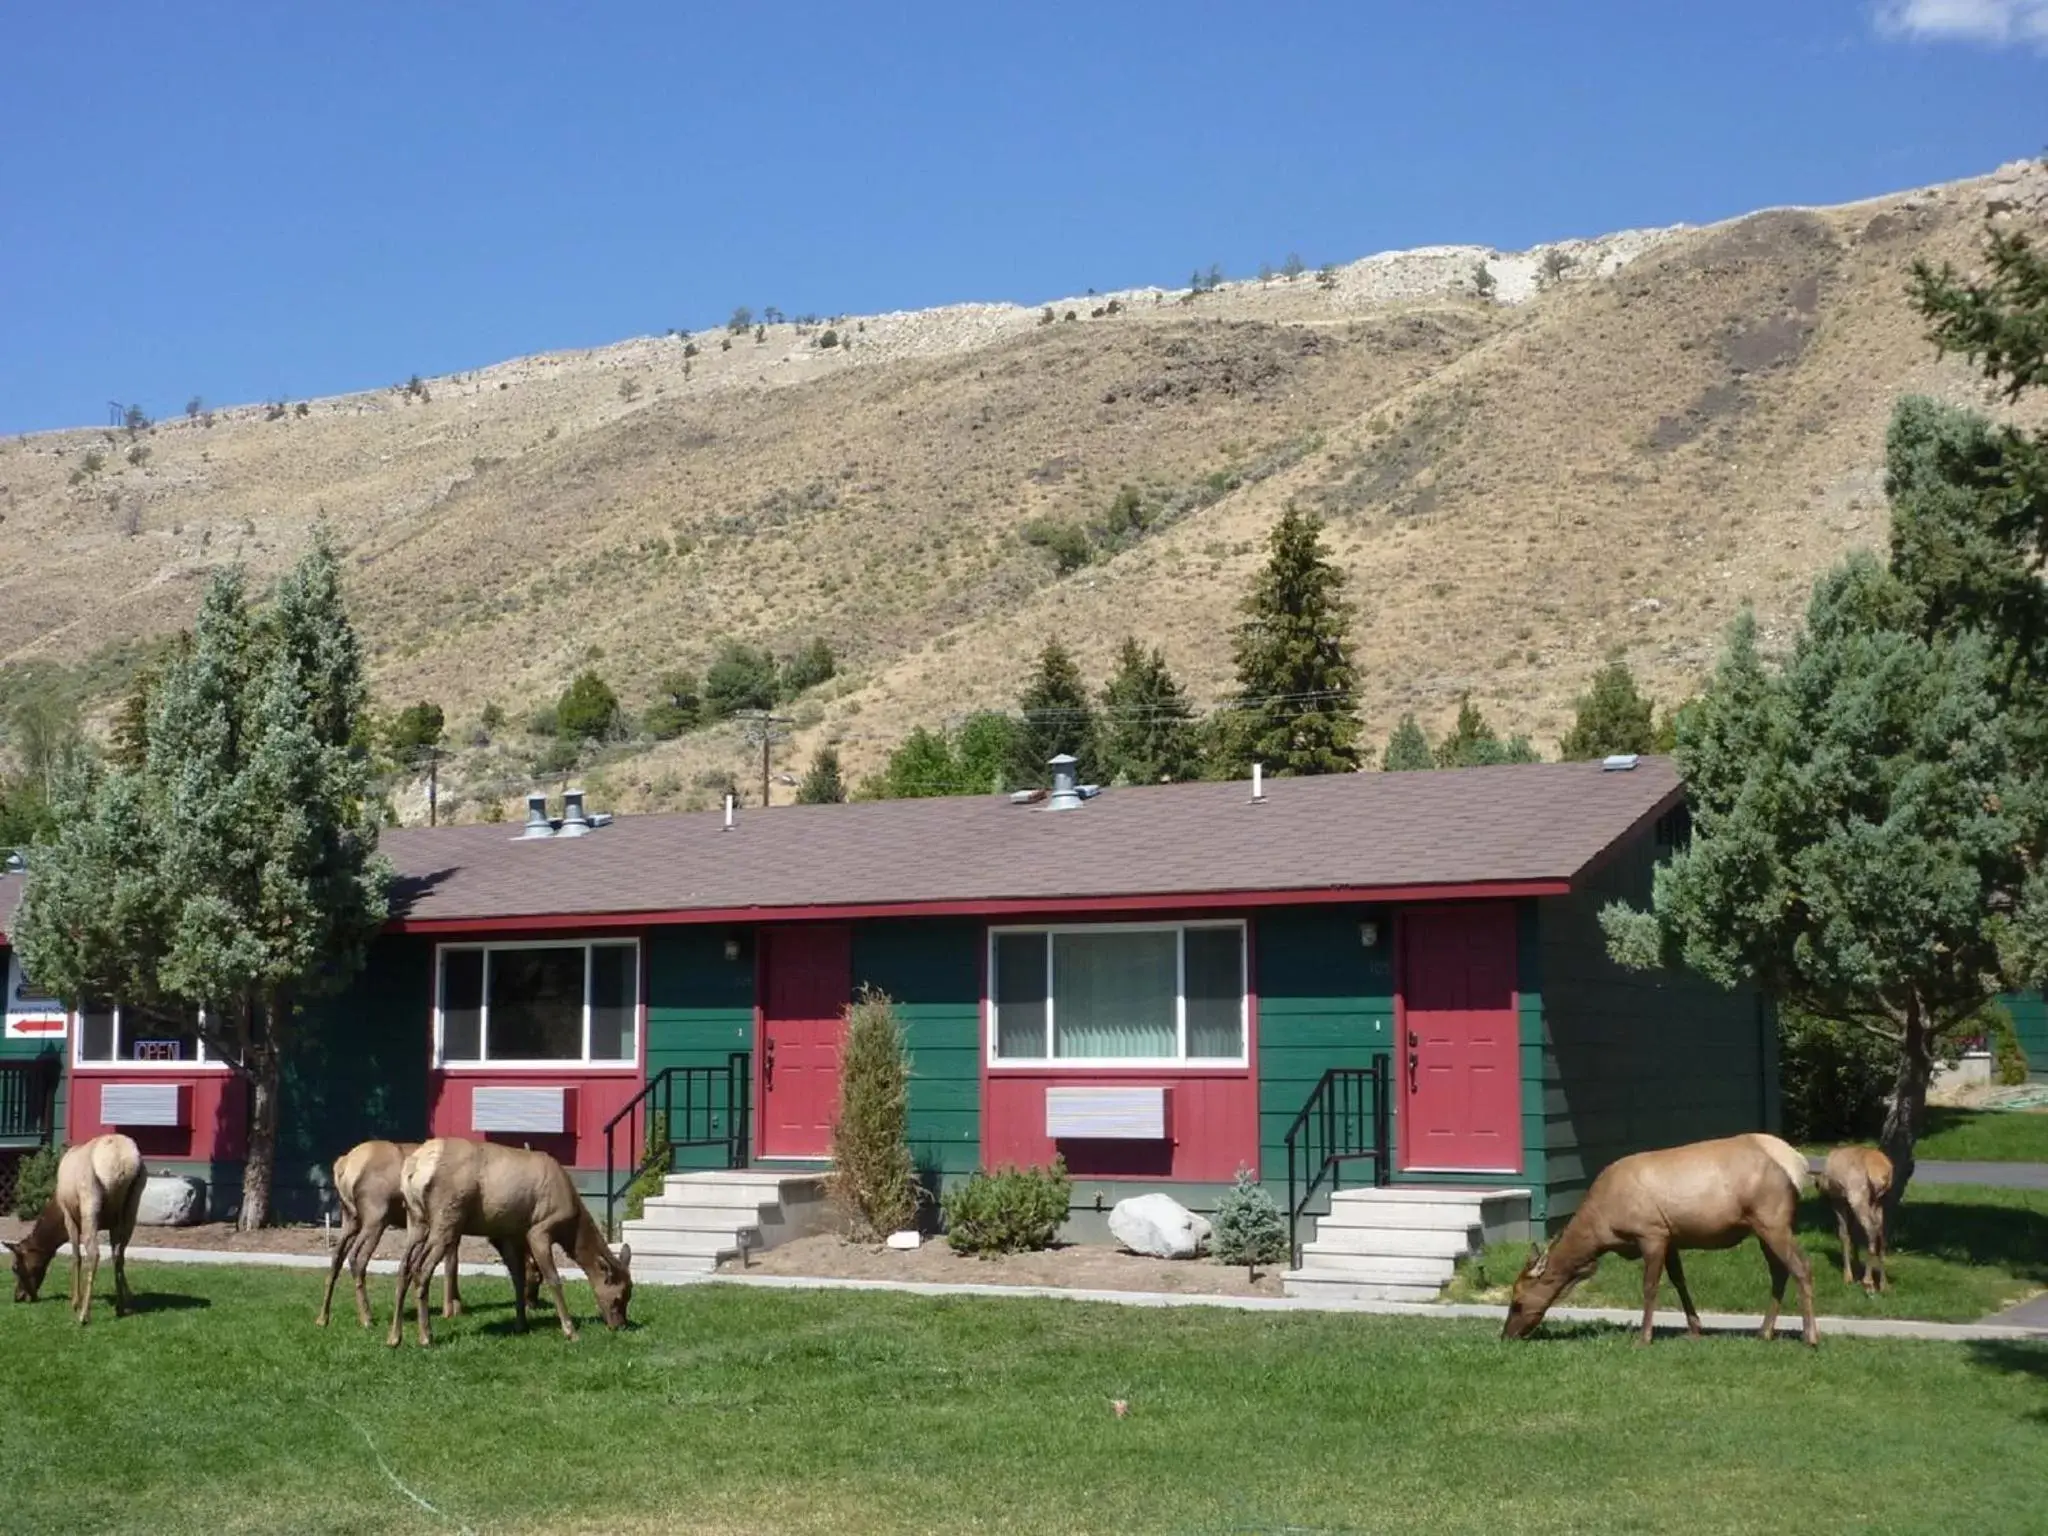 Property building, Other Animals in Yellowstone Gateway Inn